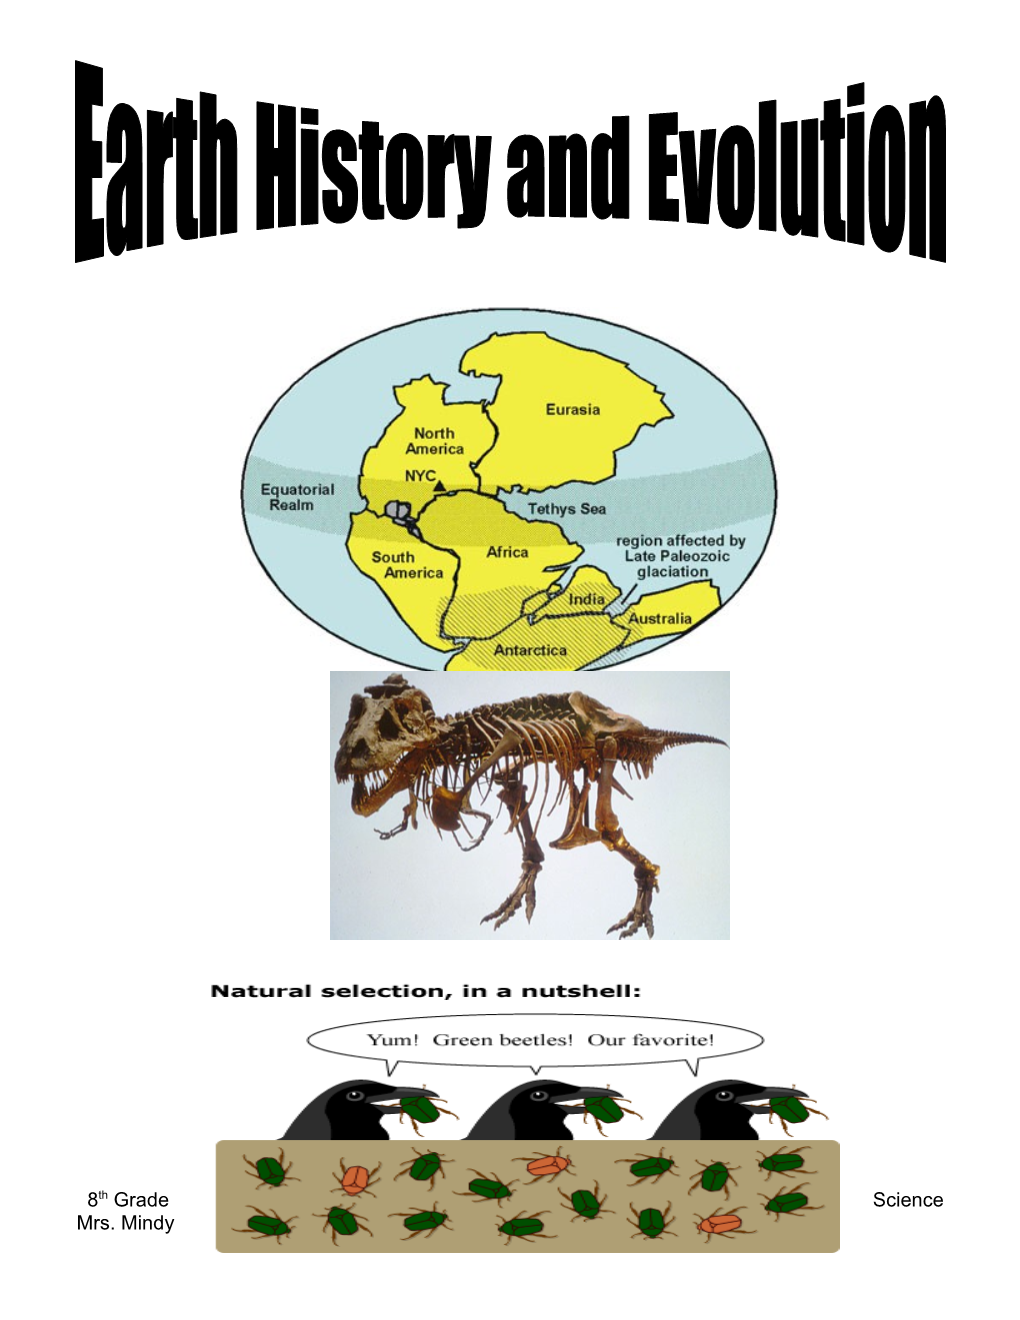 Earth History and Evolution